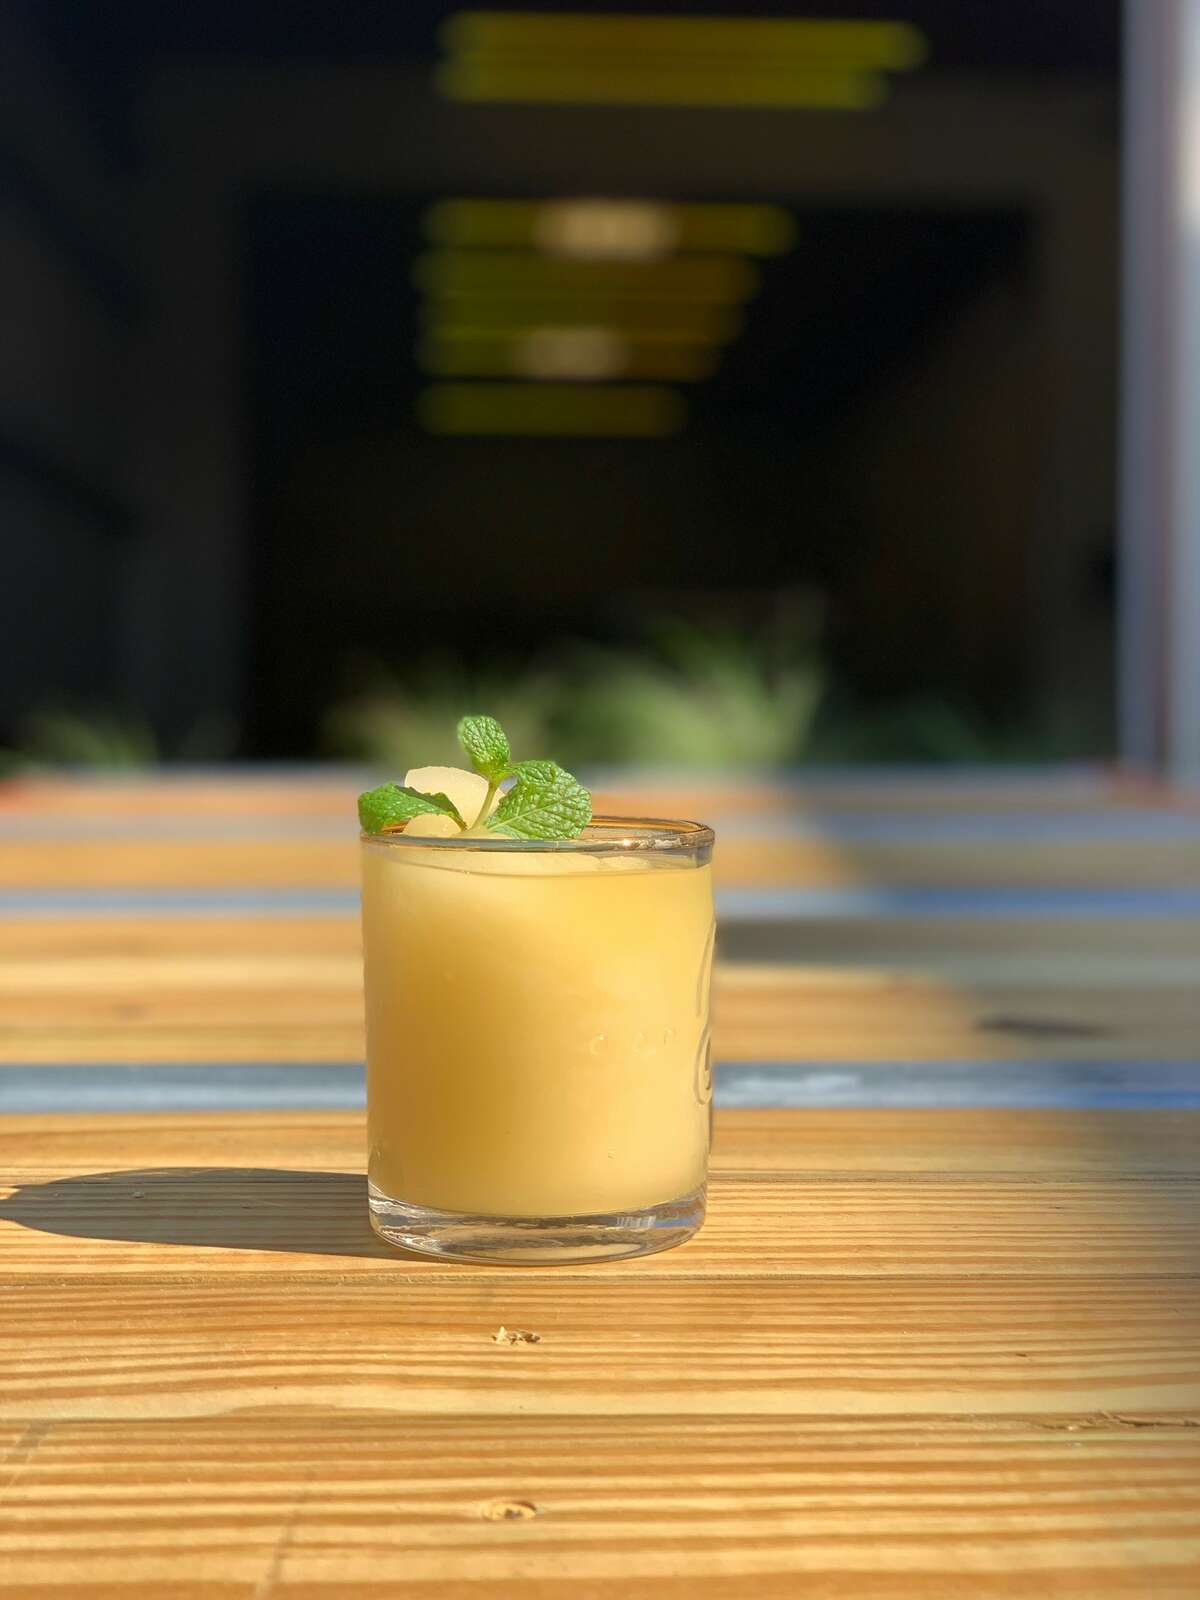 Say hello to the frozen "Take Me To Tulum", a frothy mixture of citrus and mint.